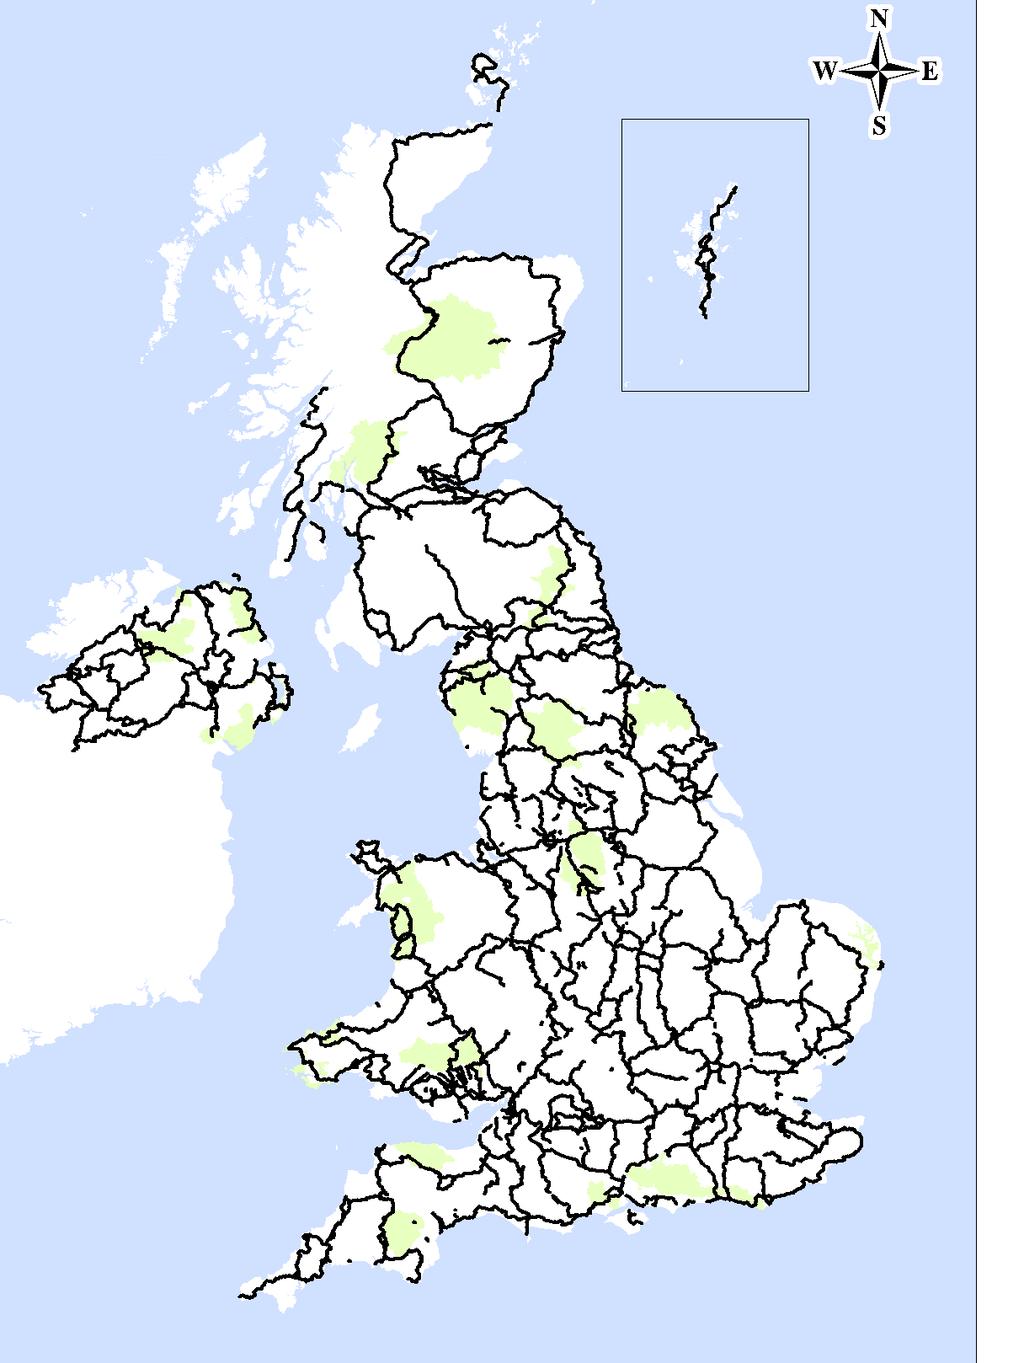 A strategic intervention: National Cycle Network map of UK Grafic: Sustrans The national network as an exemplar project In 1995, the National Cycle Network was launched in the UK and is now over